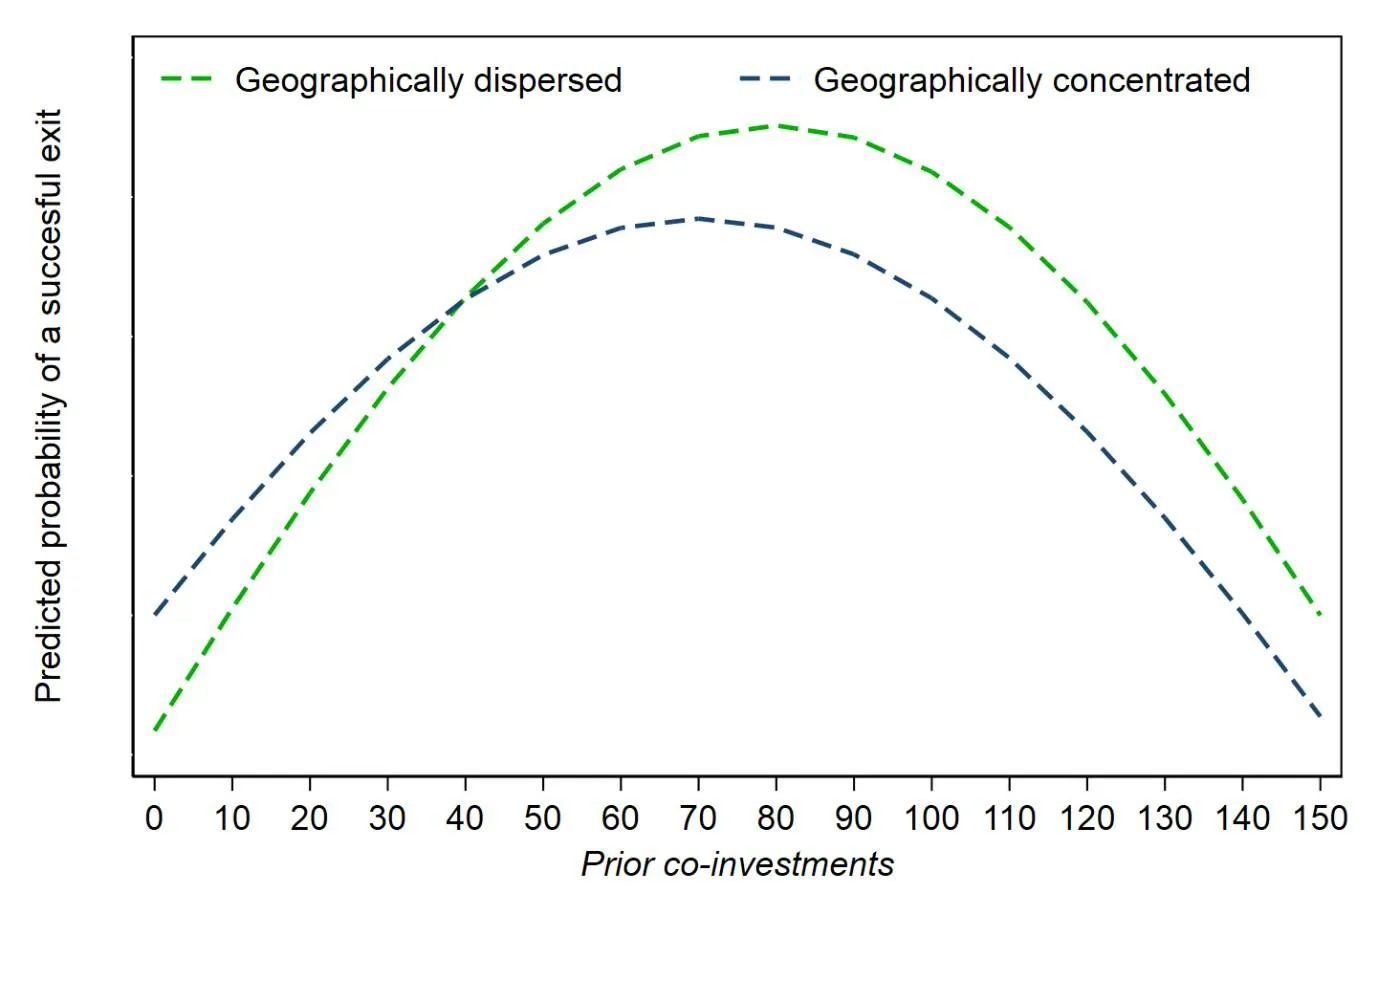 Repeated co-investment brings more benefits for geographically dispersed syndicates, than for geographically concentrated ones.